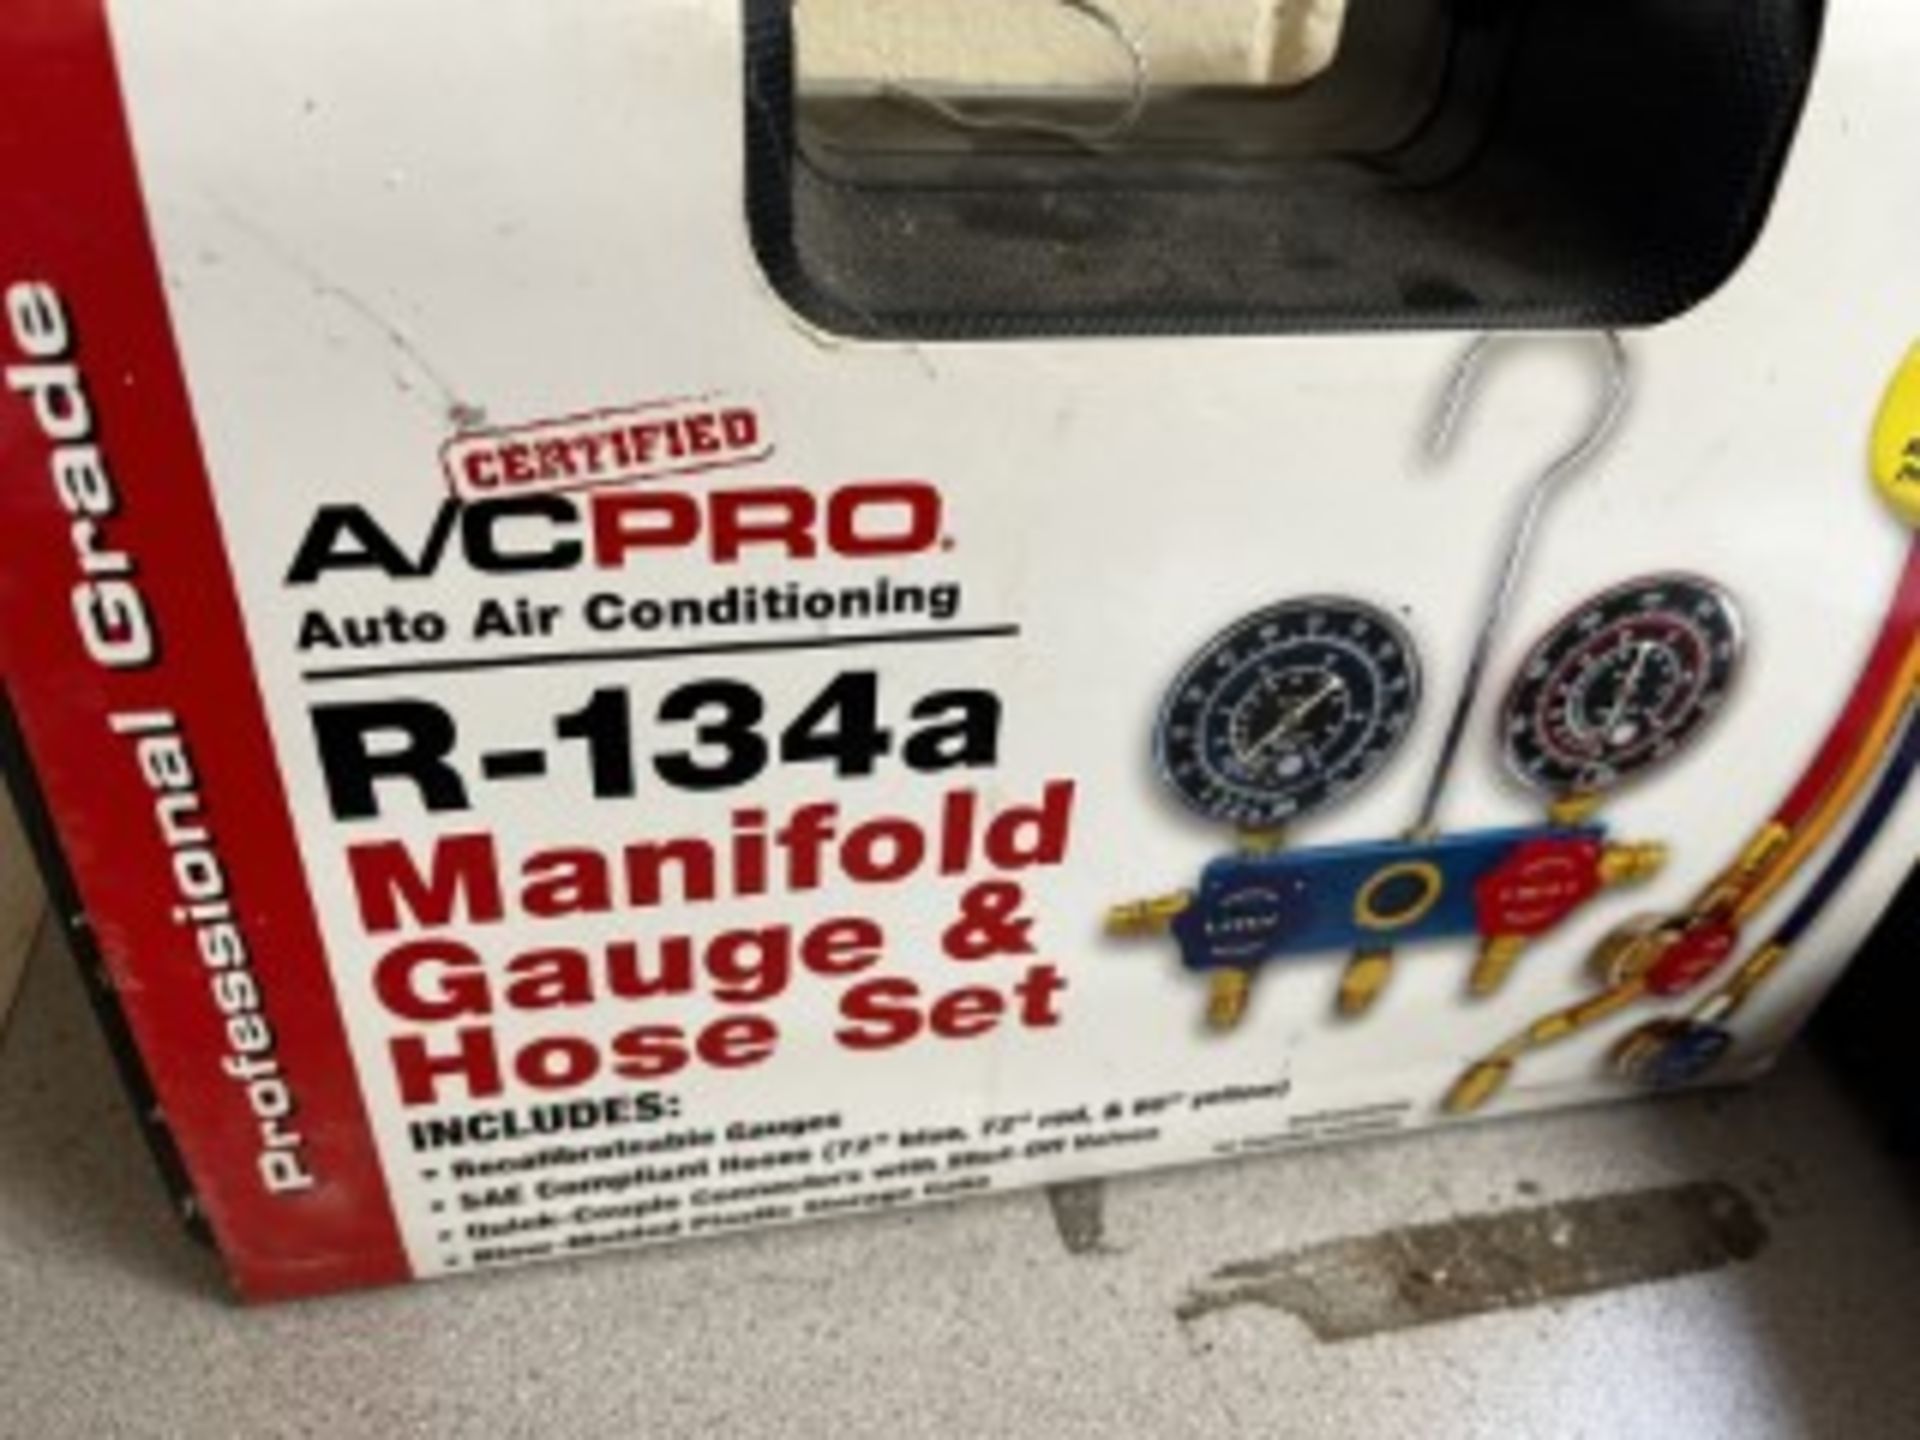 A/C PRO R-134A AUTO AIR CONDITIONING MANIFOLD GAUGE & HOSE SET - NEW IN BOX - Image 2 of 2